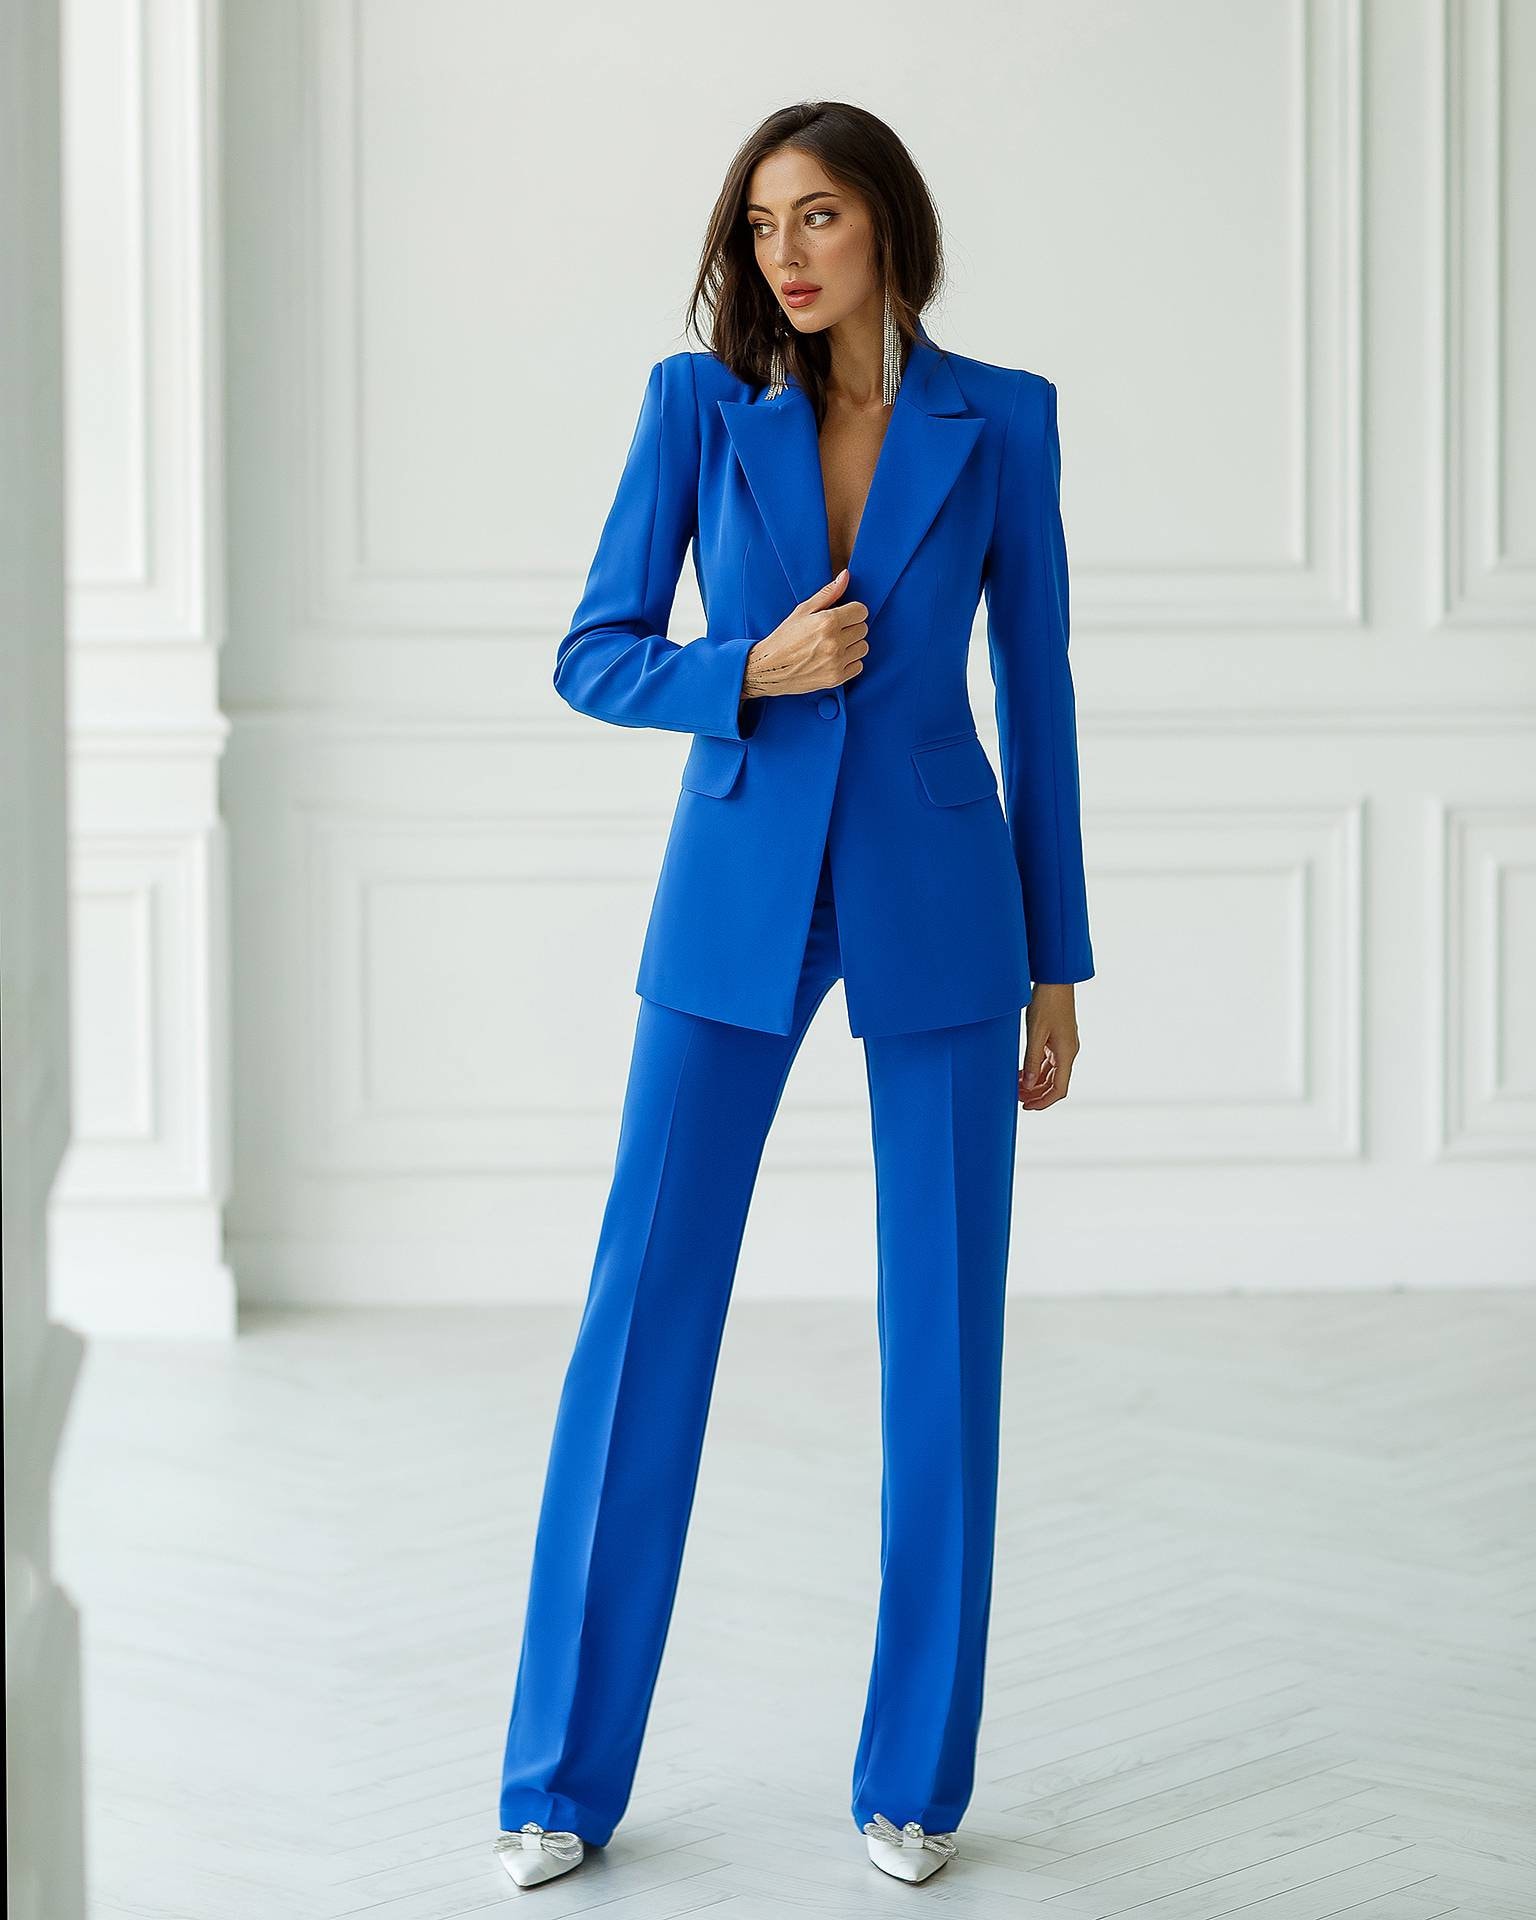 Royal Blue Formal Pants Suit With Single Breasted Blazer and